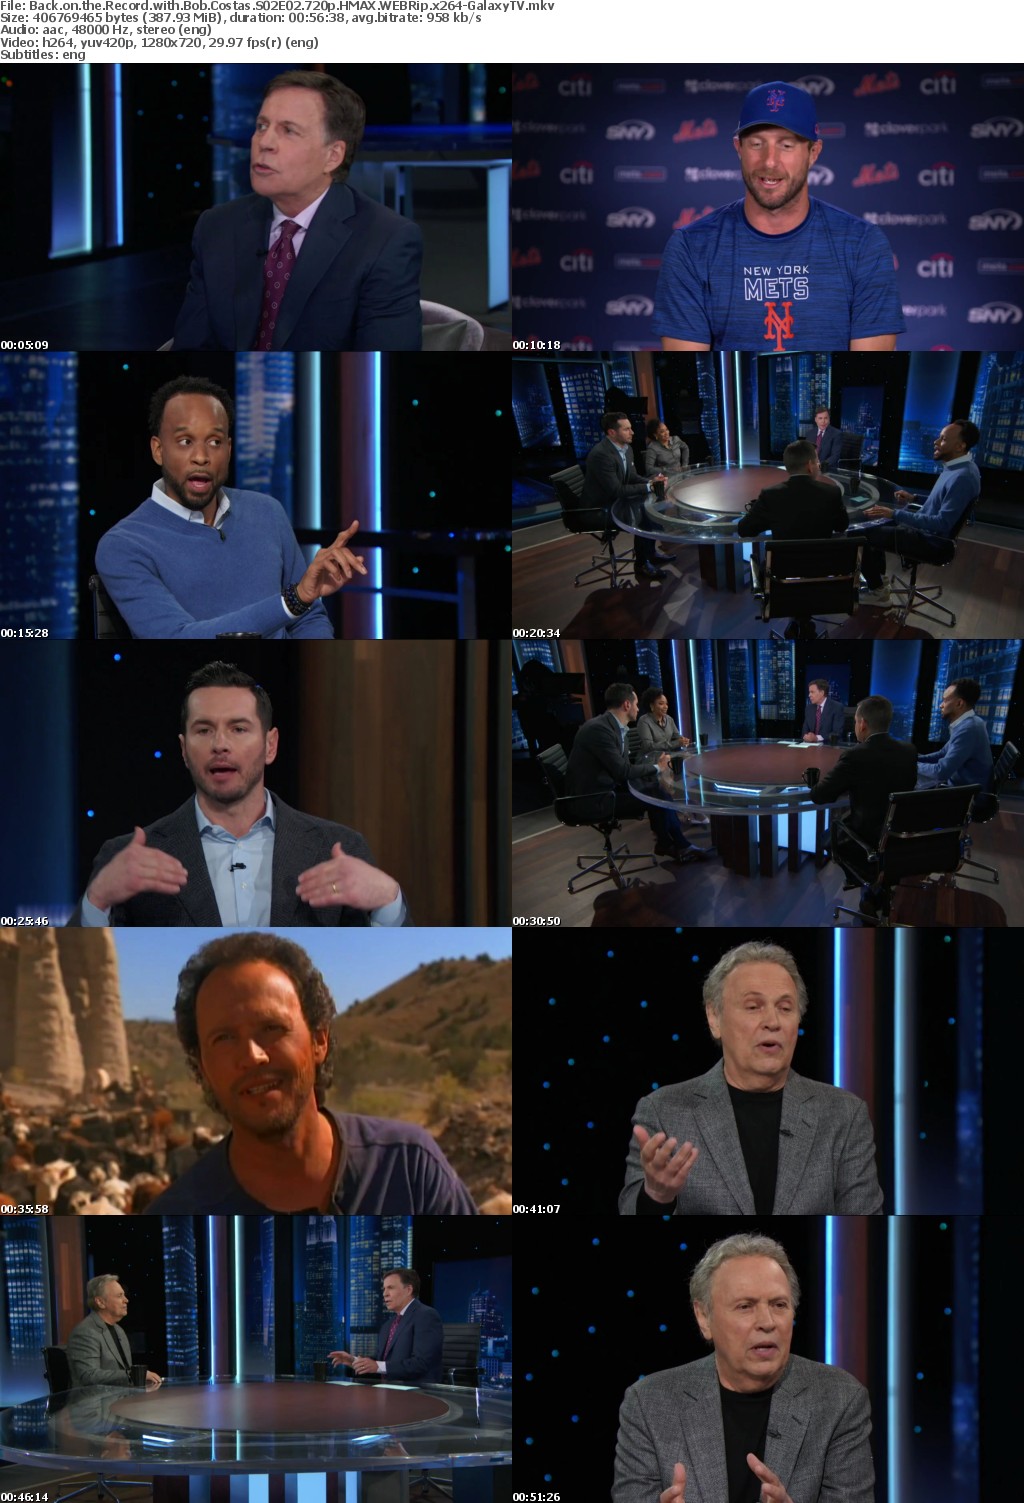 Back on the Record with Bob Costas S02 COMPLETE 720p HMAX WEBRip x264-GalaxyTV